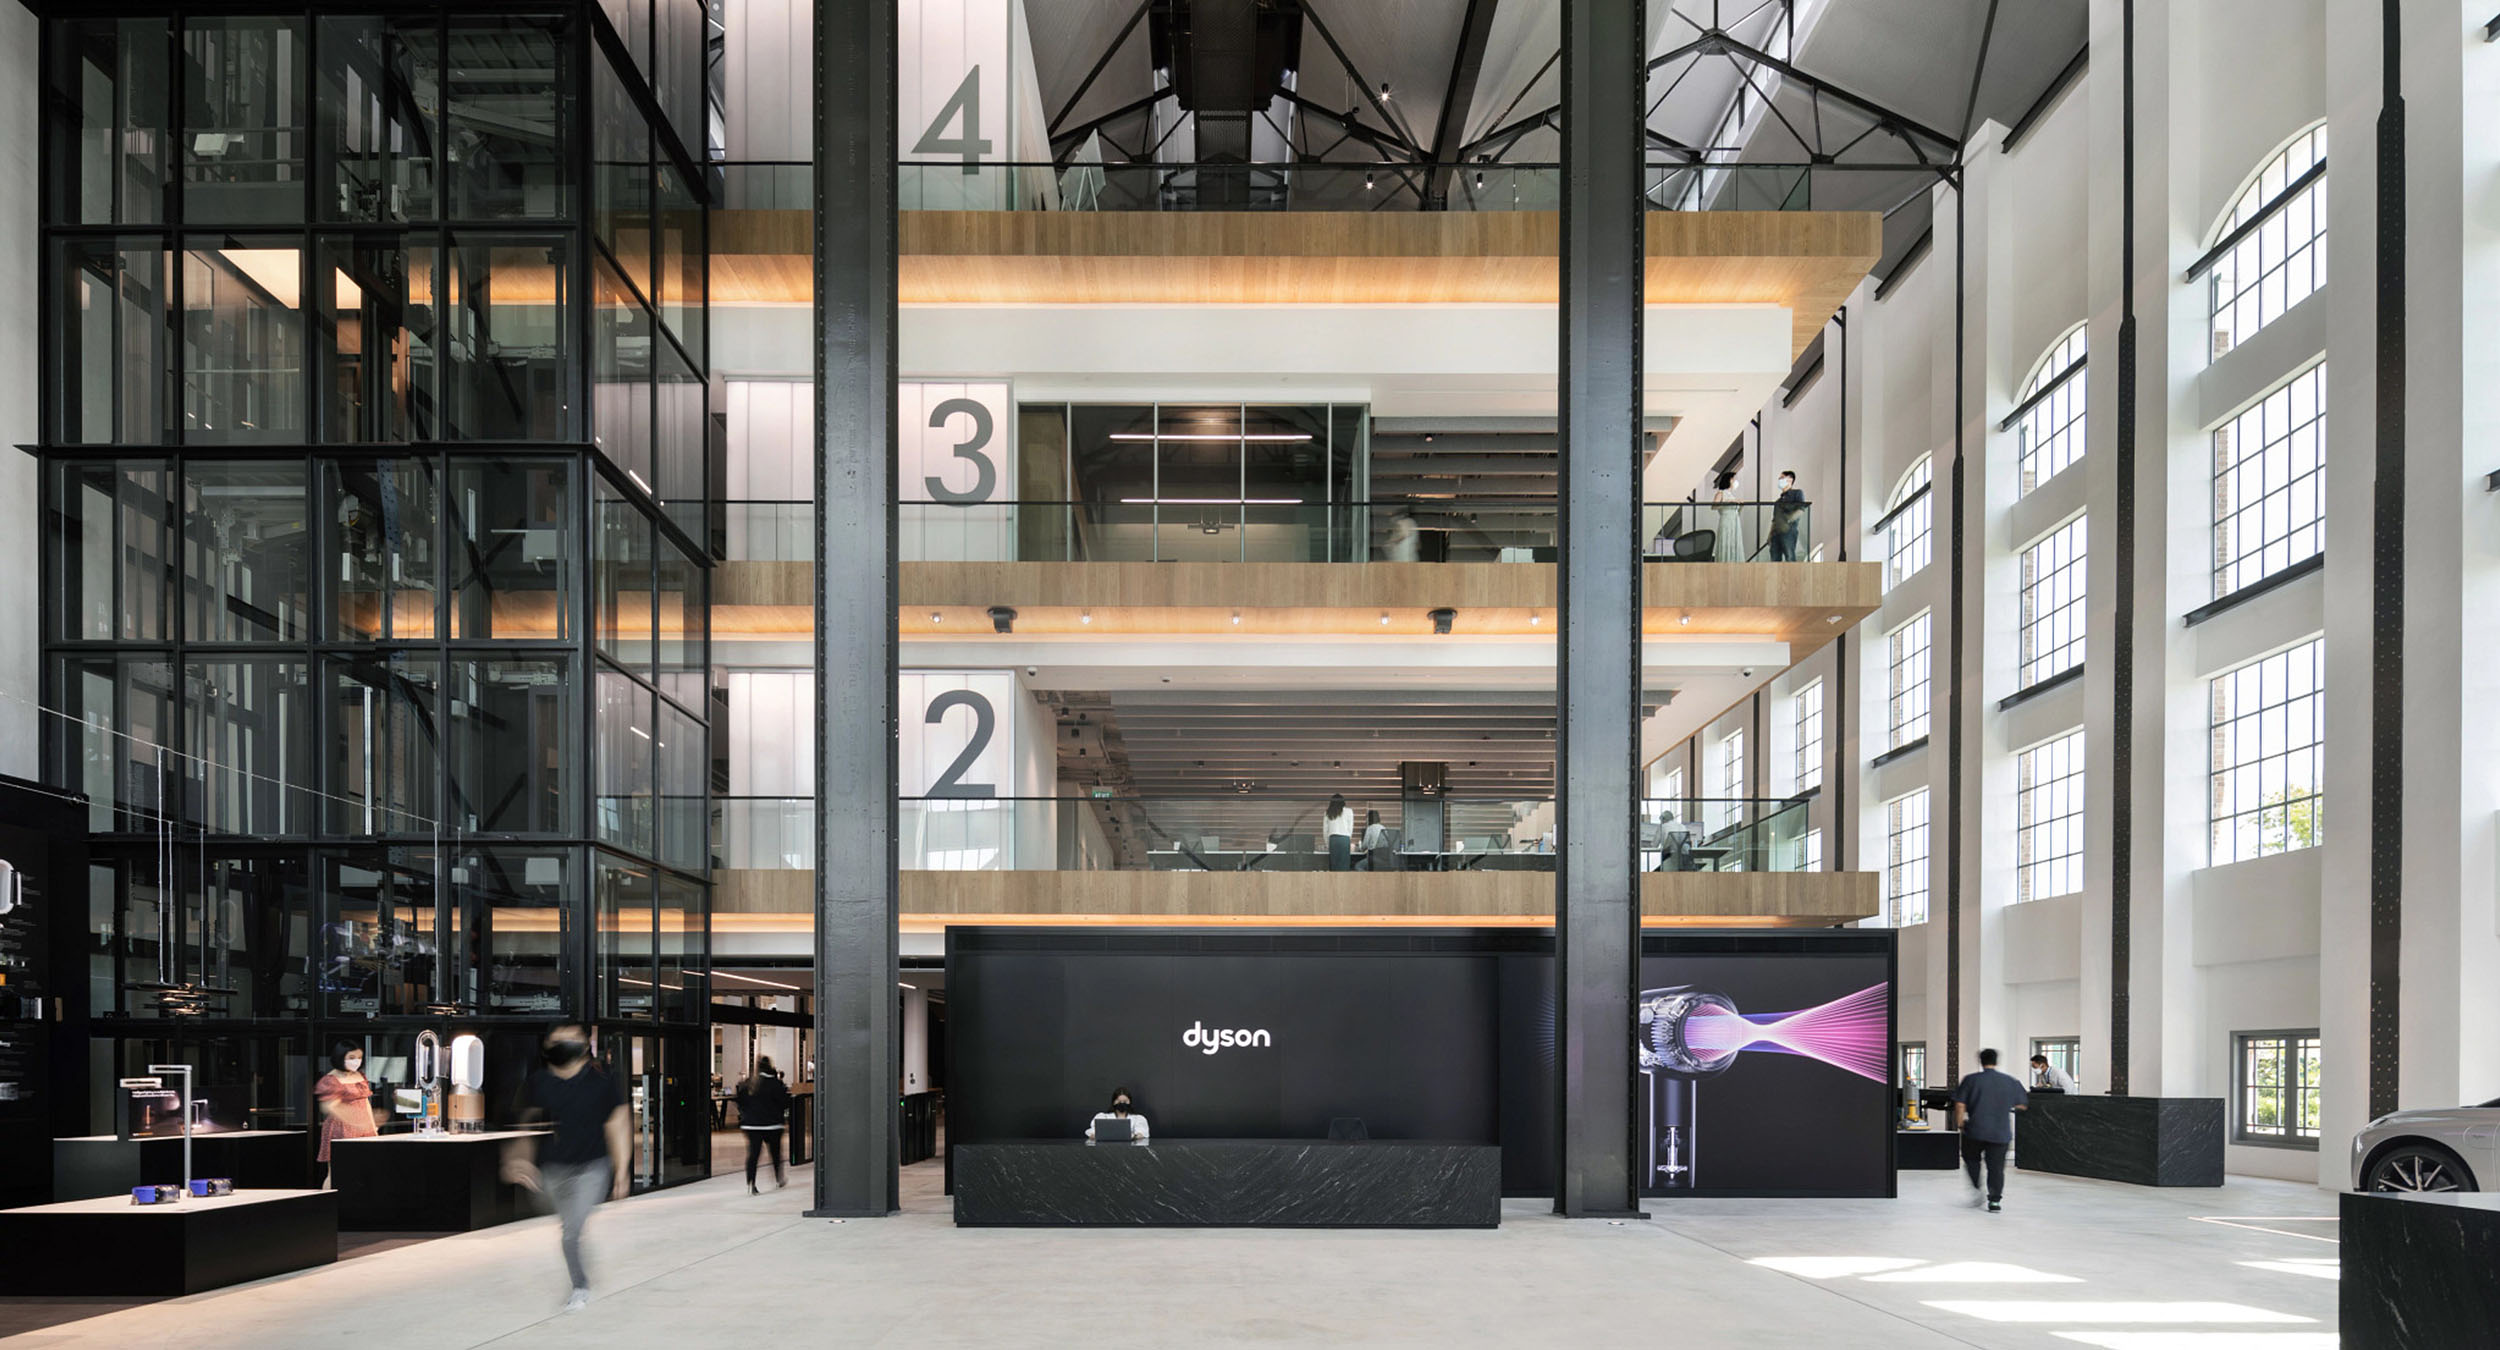 Dyson's new global headquarters lights up iconic St James Power Station - M Moser Associates